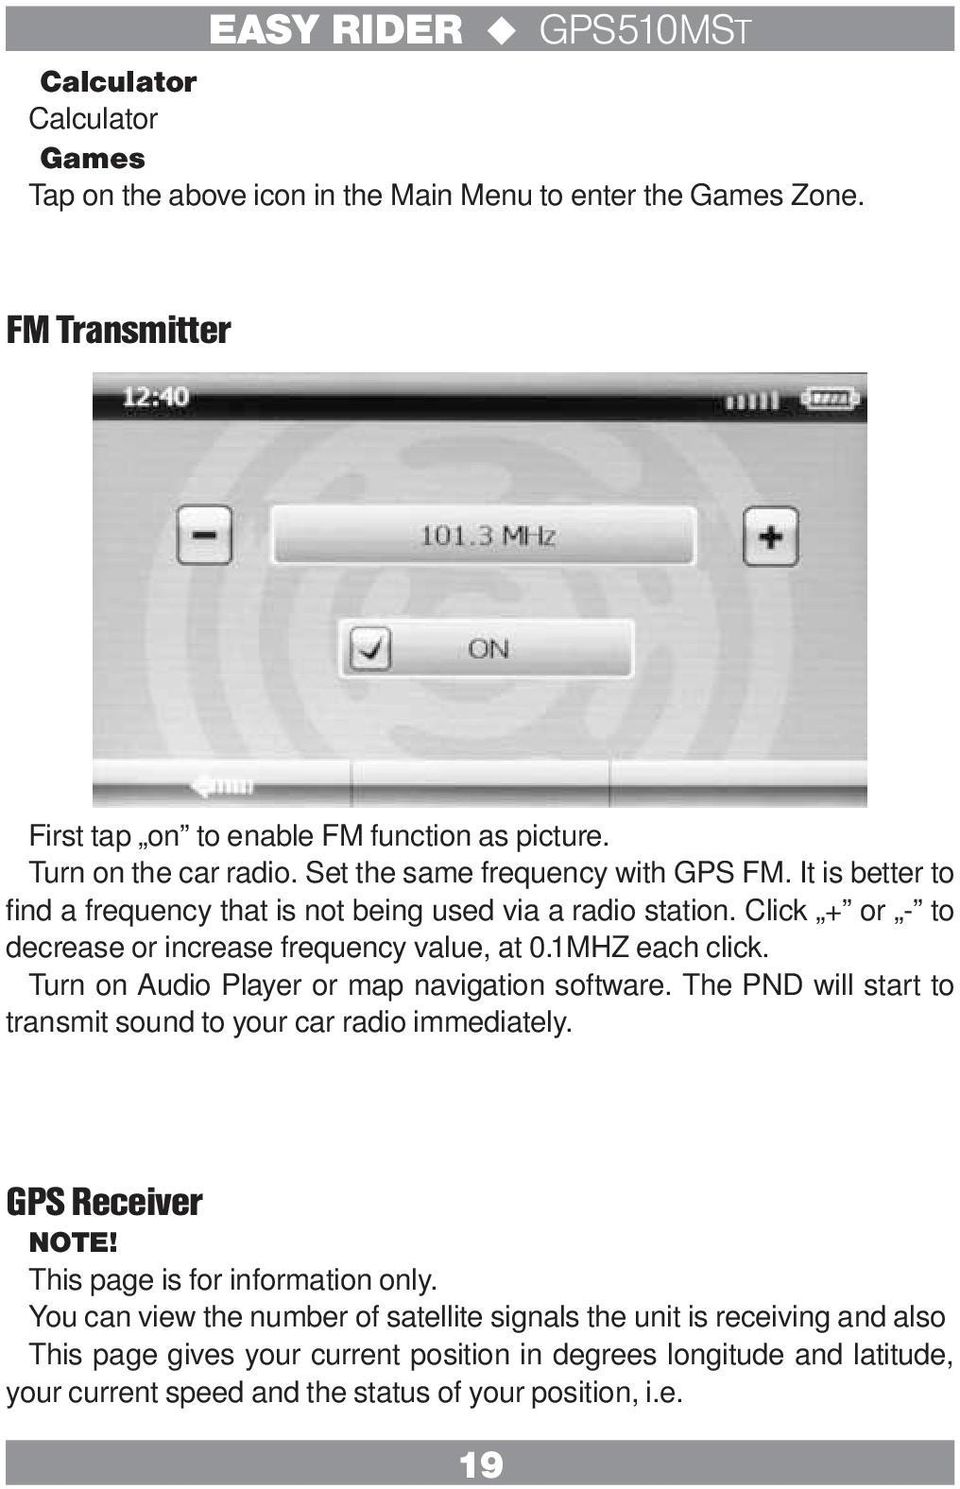 1MHZ each click. Turn on Audio Player or map navigation software. The PND will start to transmit sound to your car radio immediately. GPS Receiver NOTE! This page is for information only.